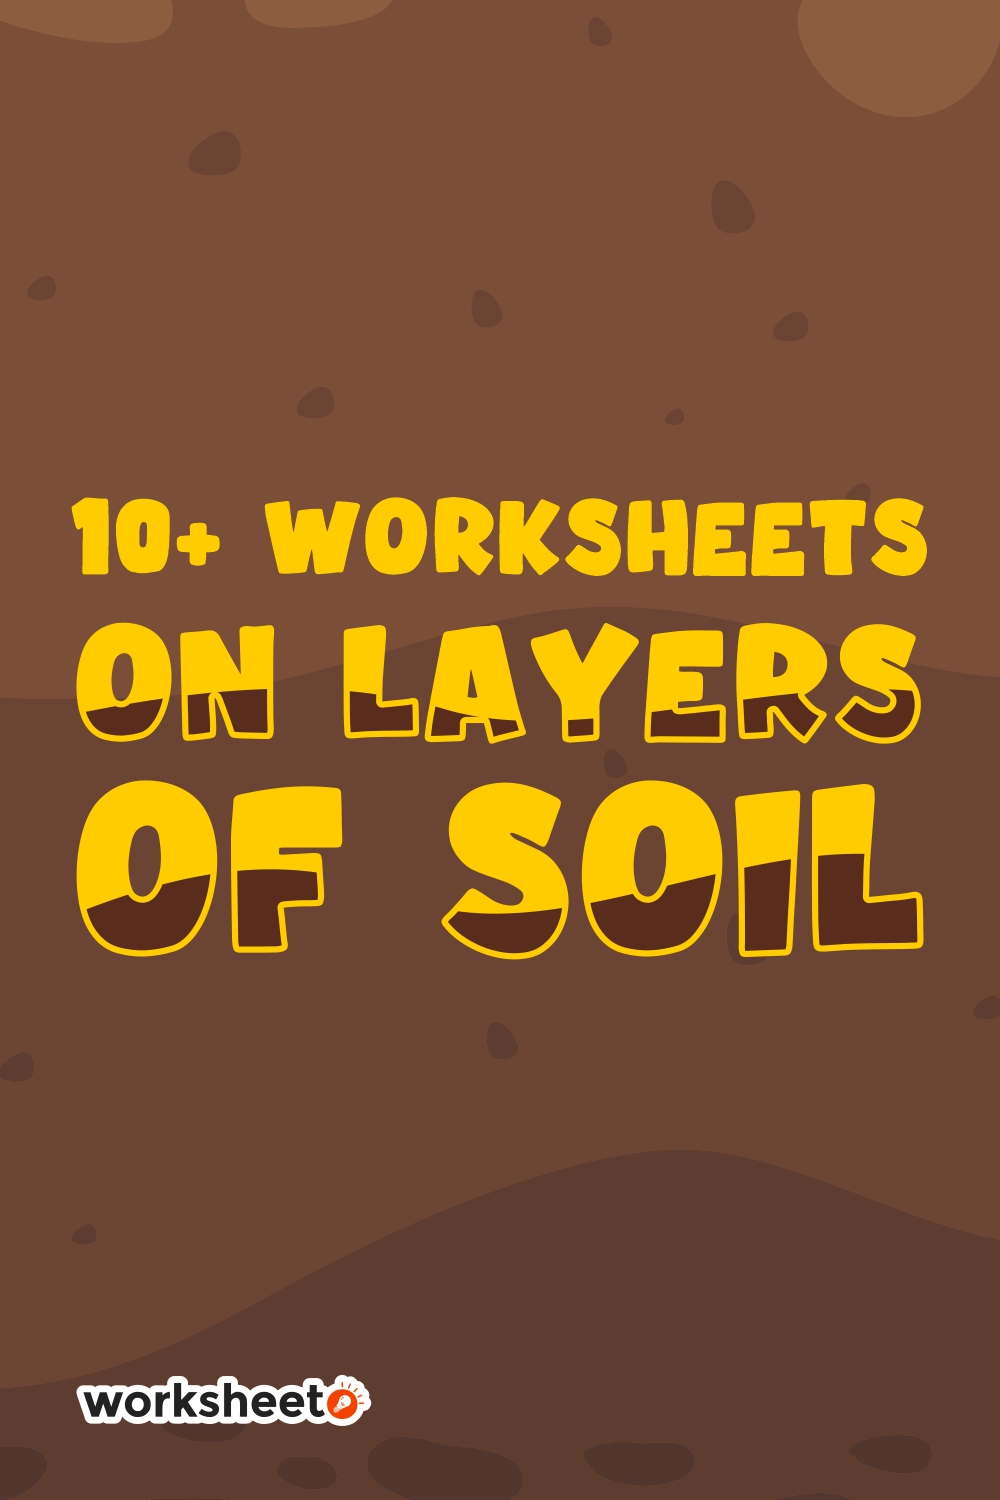 15-worksheets-on-layers-of-soil-worksheeto